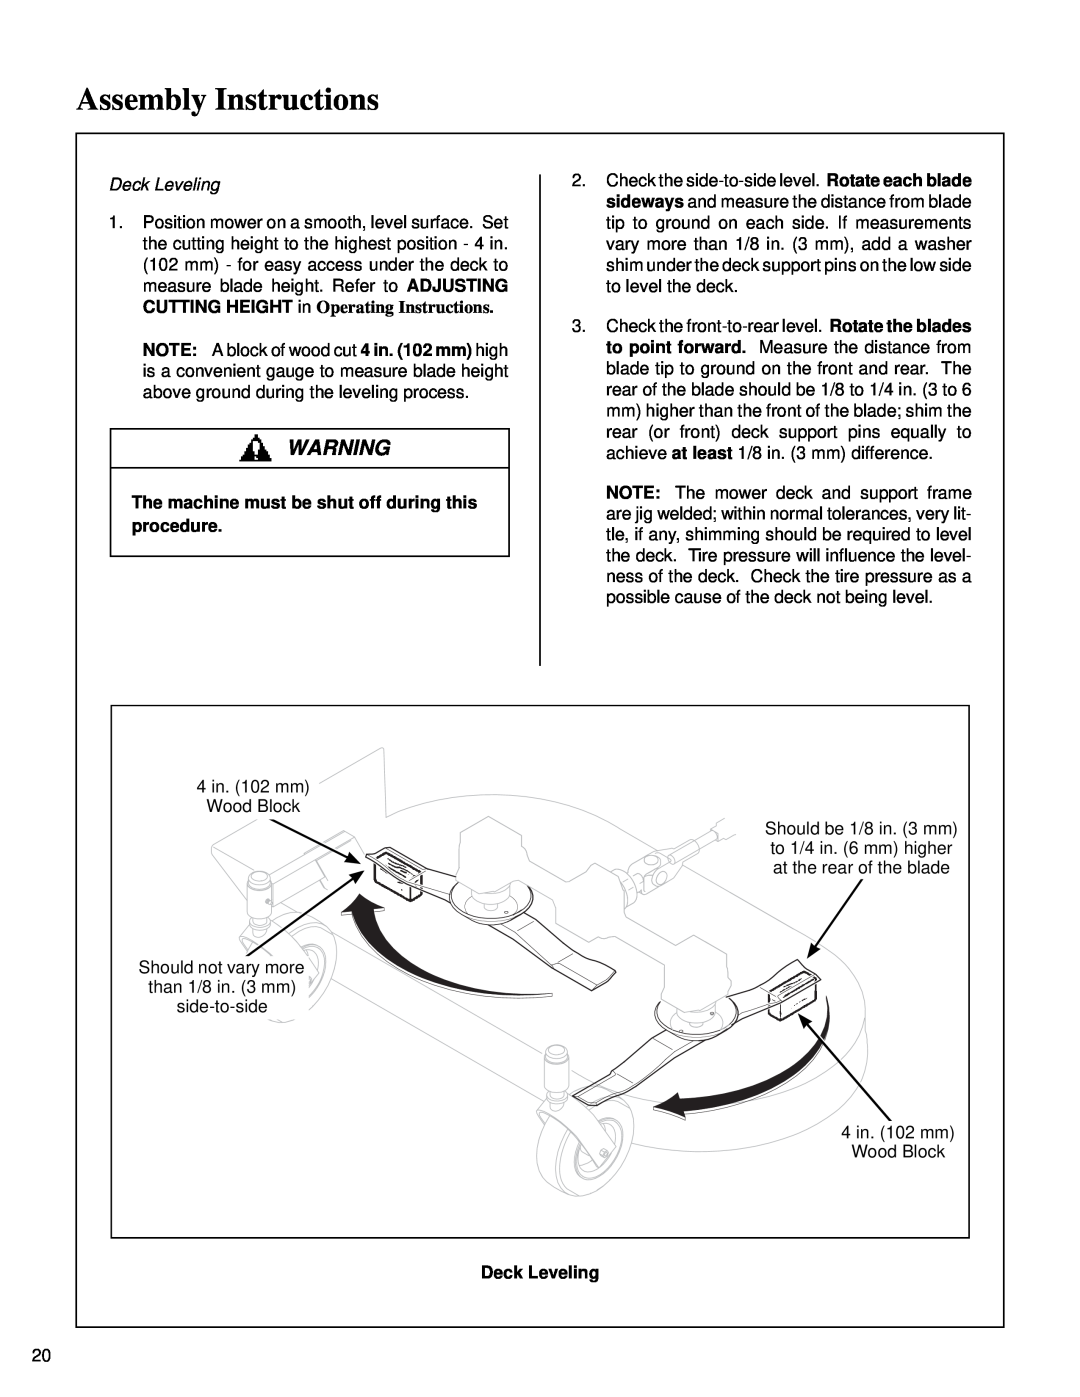 Briggs & Stratton MB (18 HP) Assembly Instructions, CUTTING HEIGHT in Operating Instructions, procedure, Deck Leveling 